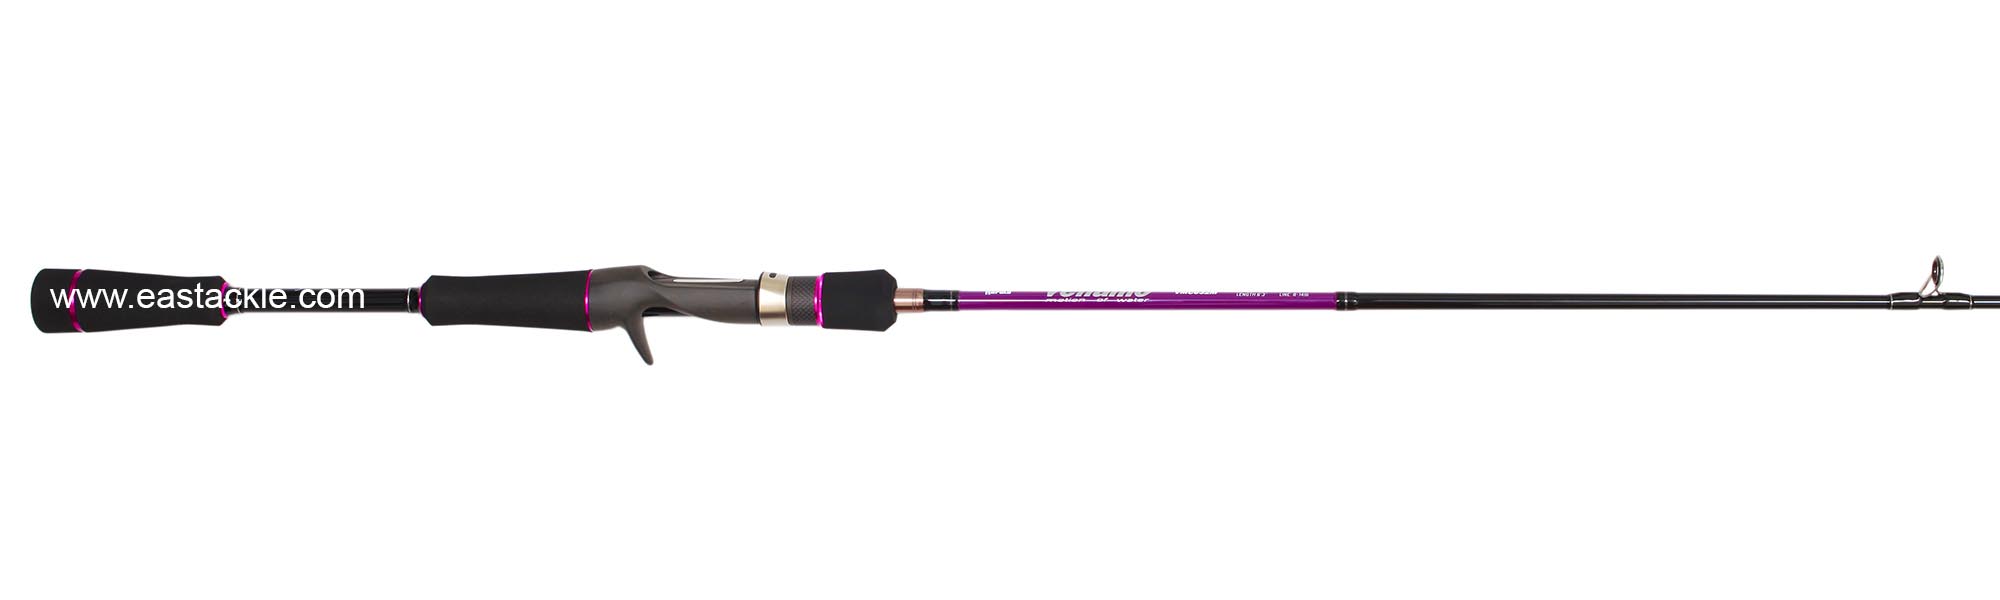 Rapala - Vellamo - VMC632M - Bait Casting Rod - Butt to Stripper Guide (Side View) | Eastackle